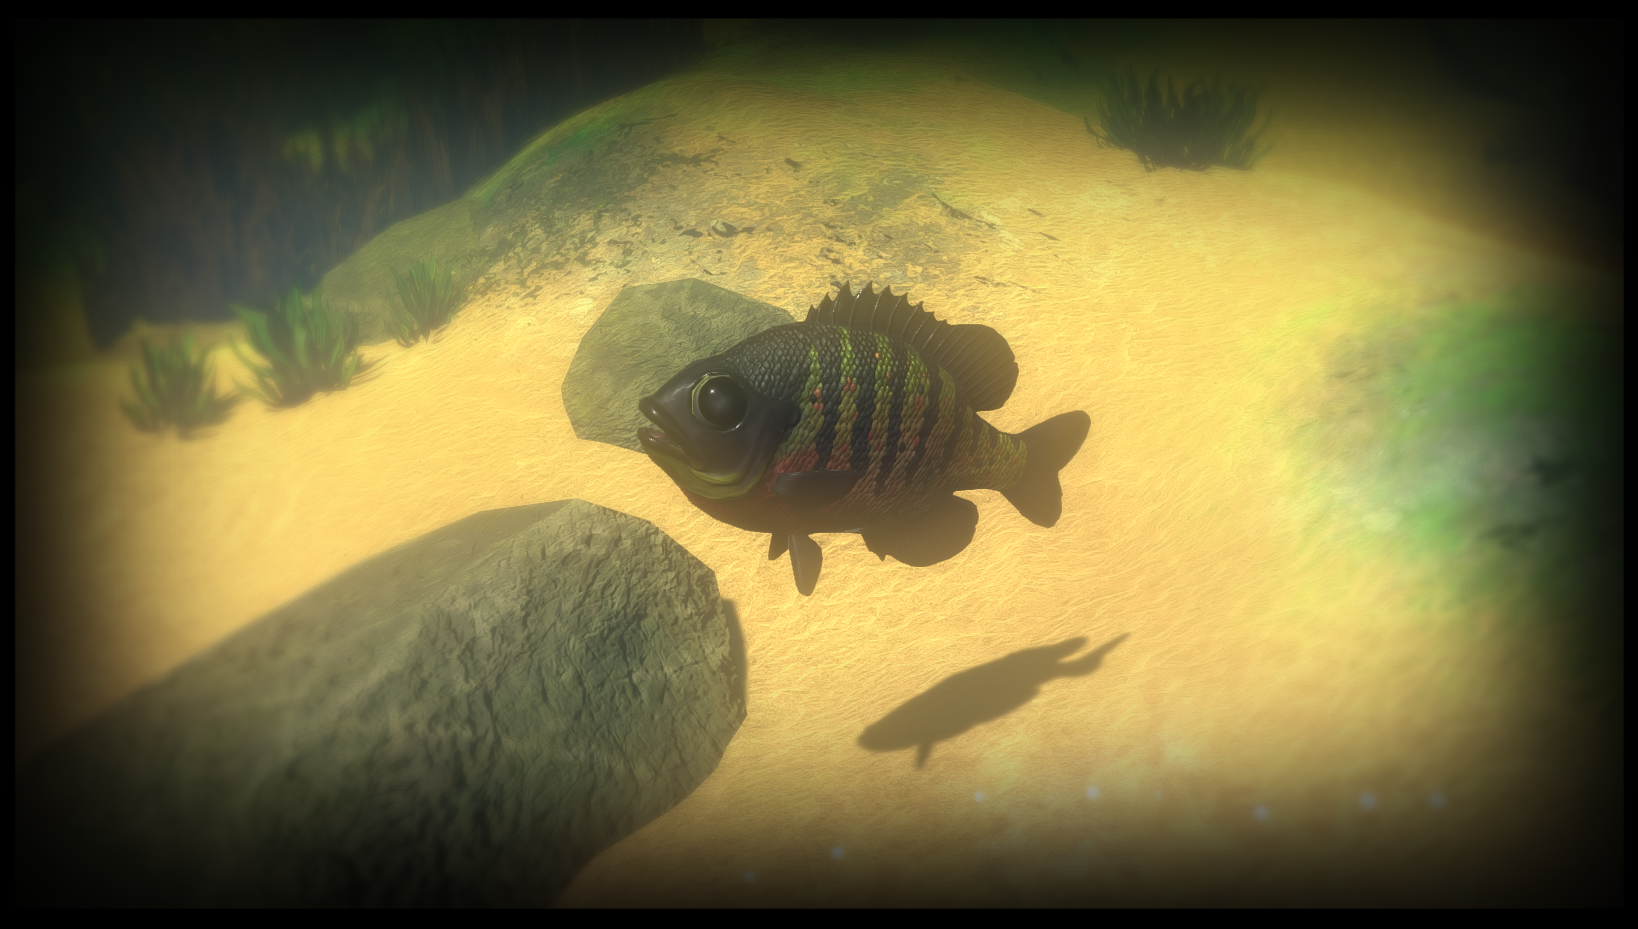 Feed and Grow: Fish - Update 0.14.1 - Steam News